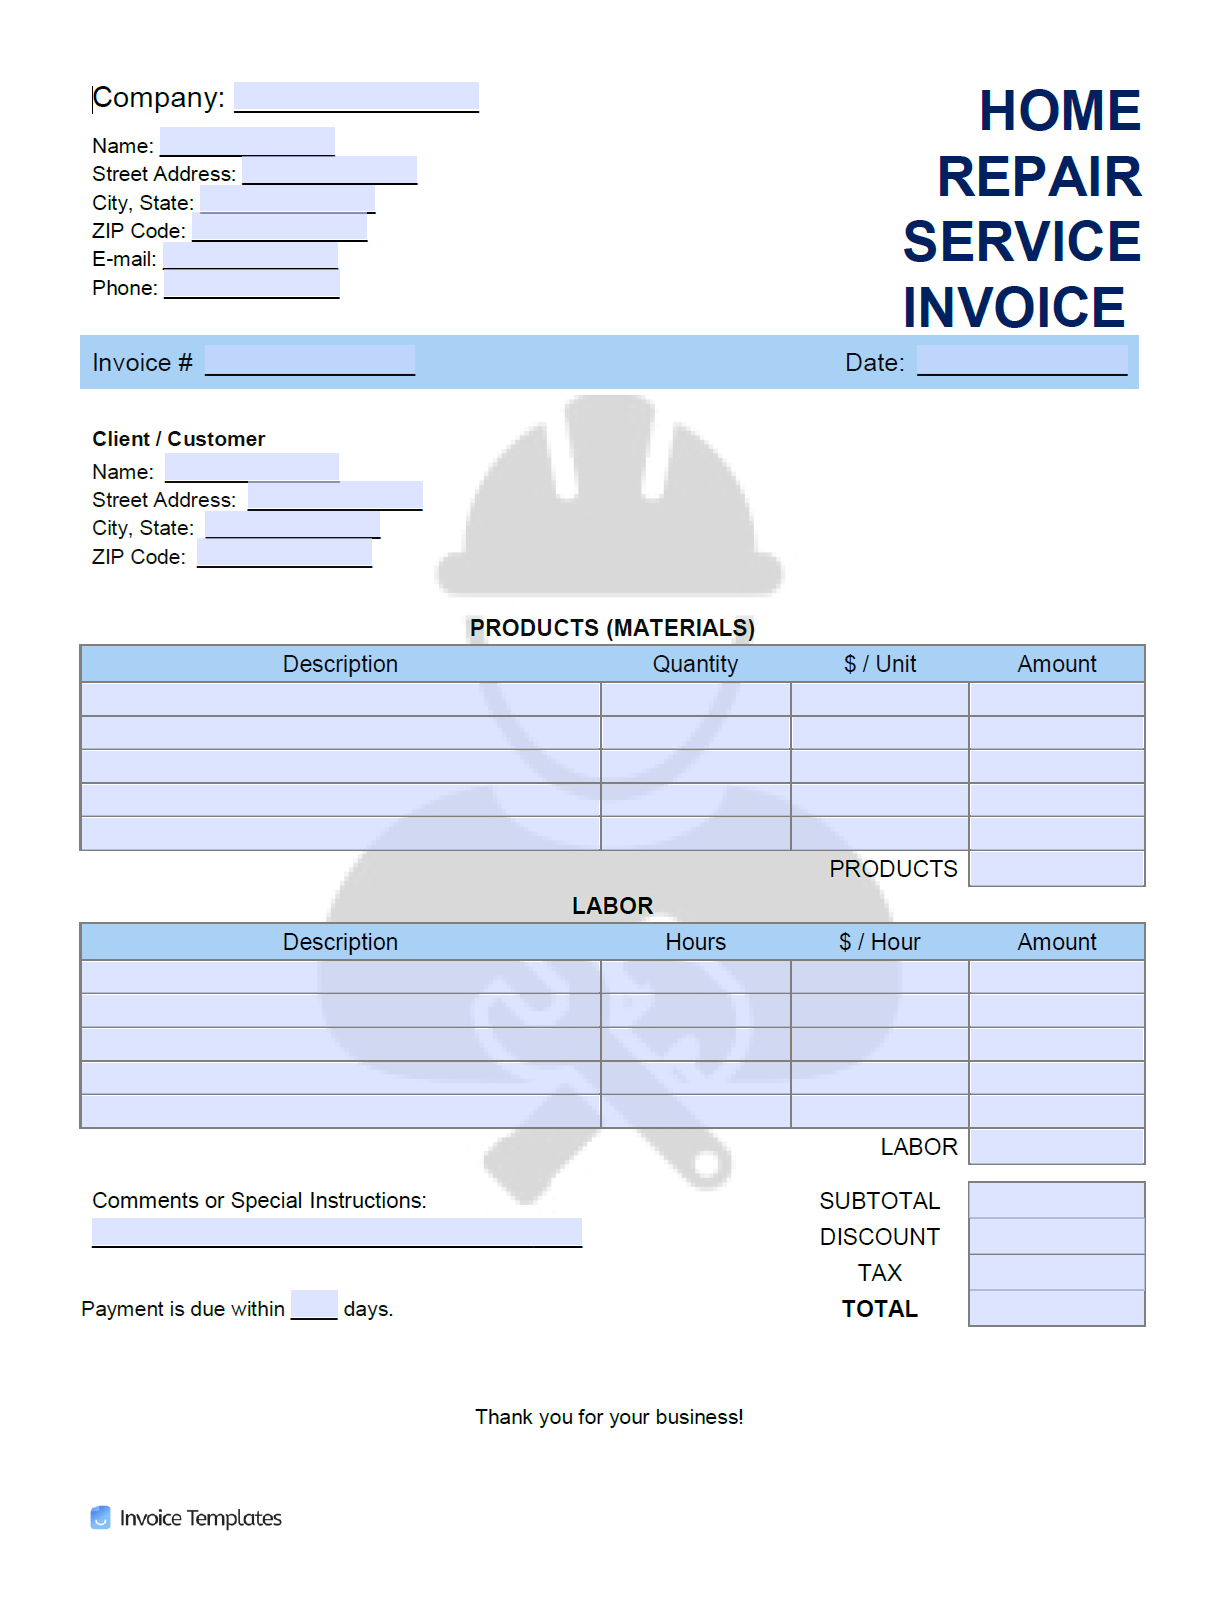 Free Home Repair Service Invoice Template PDF WORD EXCEL